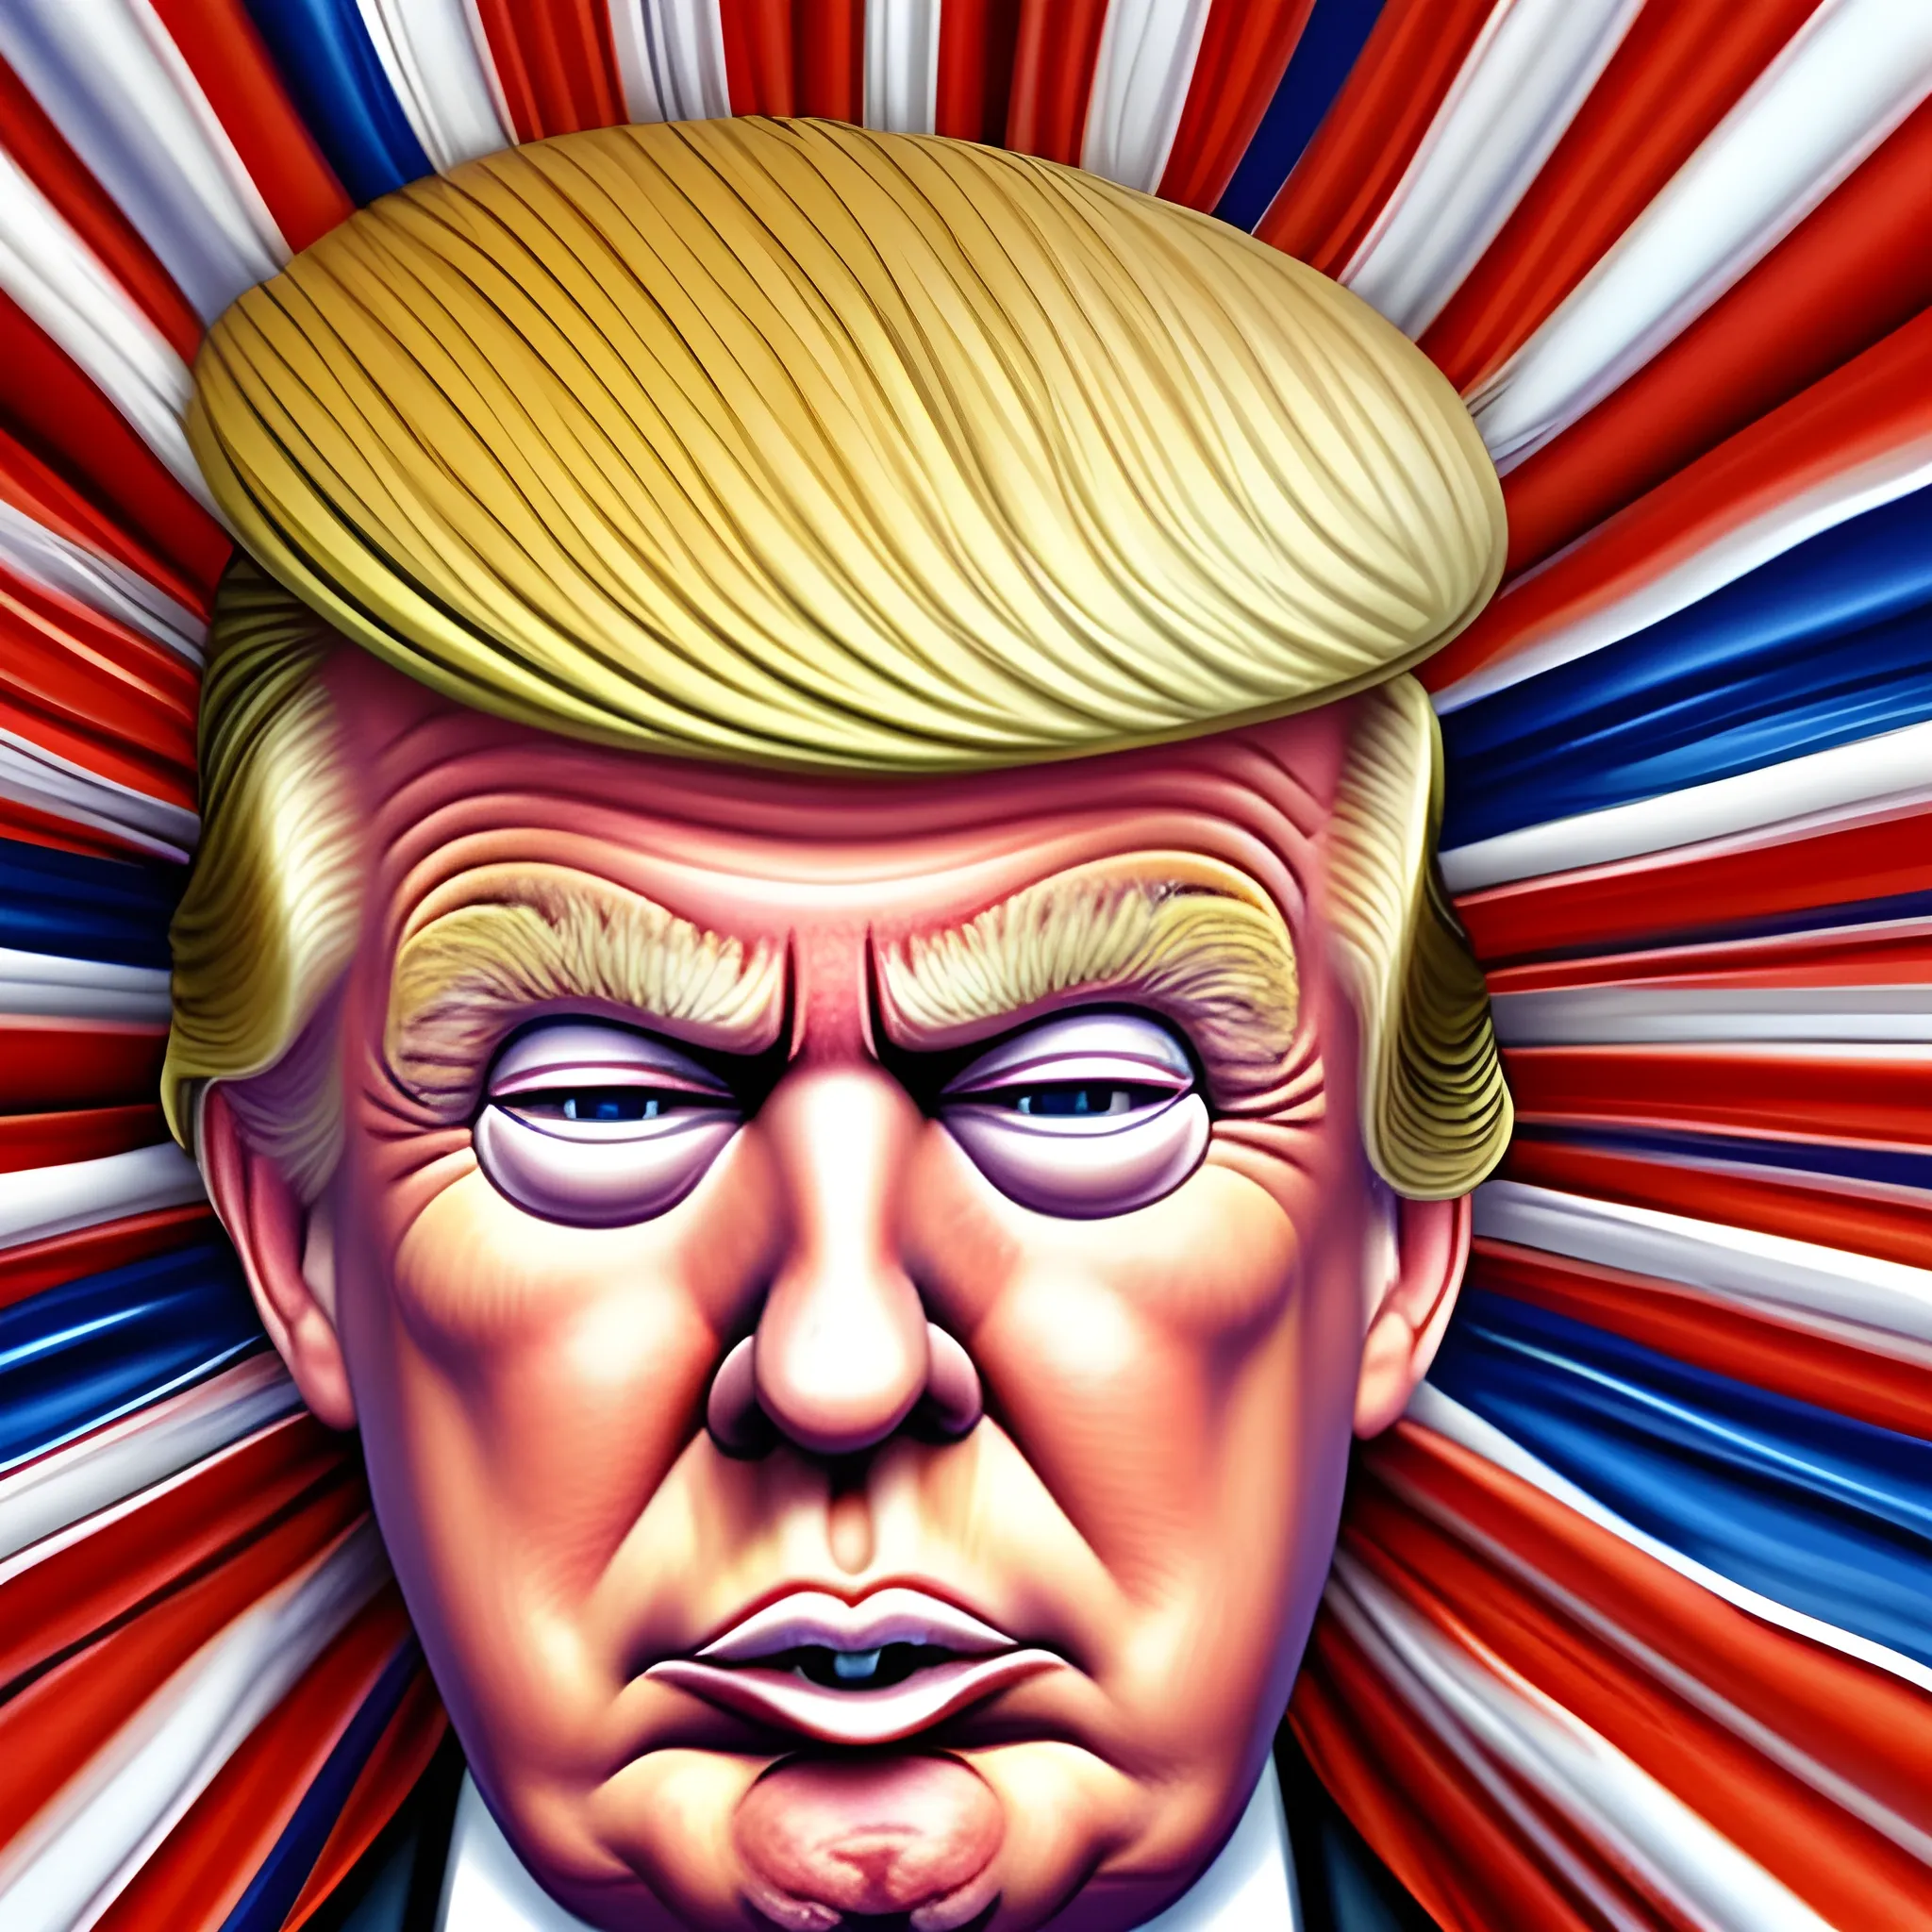 Donald Trump art in the style of grotesque caricatures, distorted perspective, close up, gigantic scale.